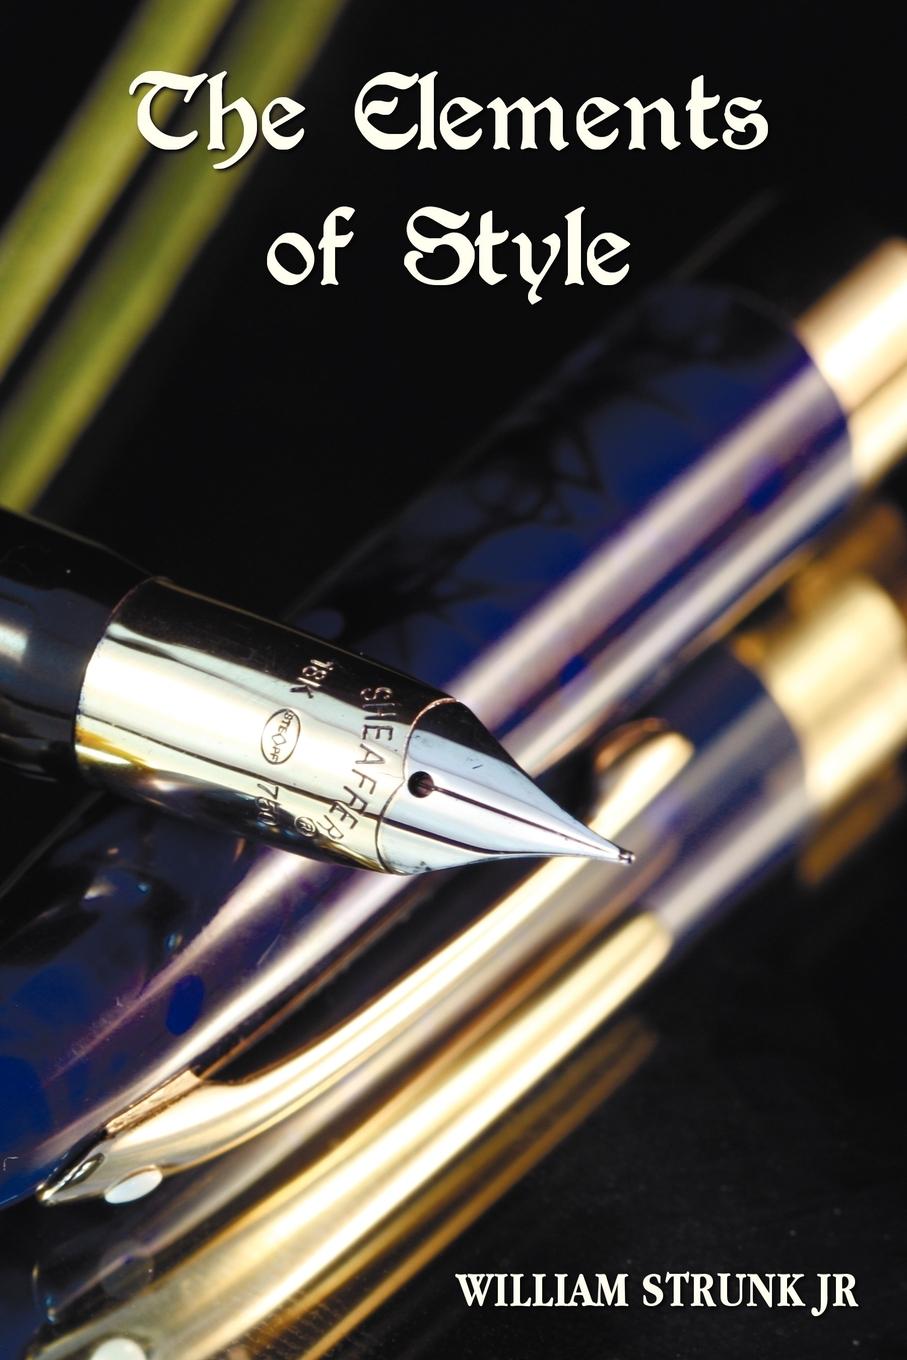 The Elements of Style - Strunk, William Jr.